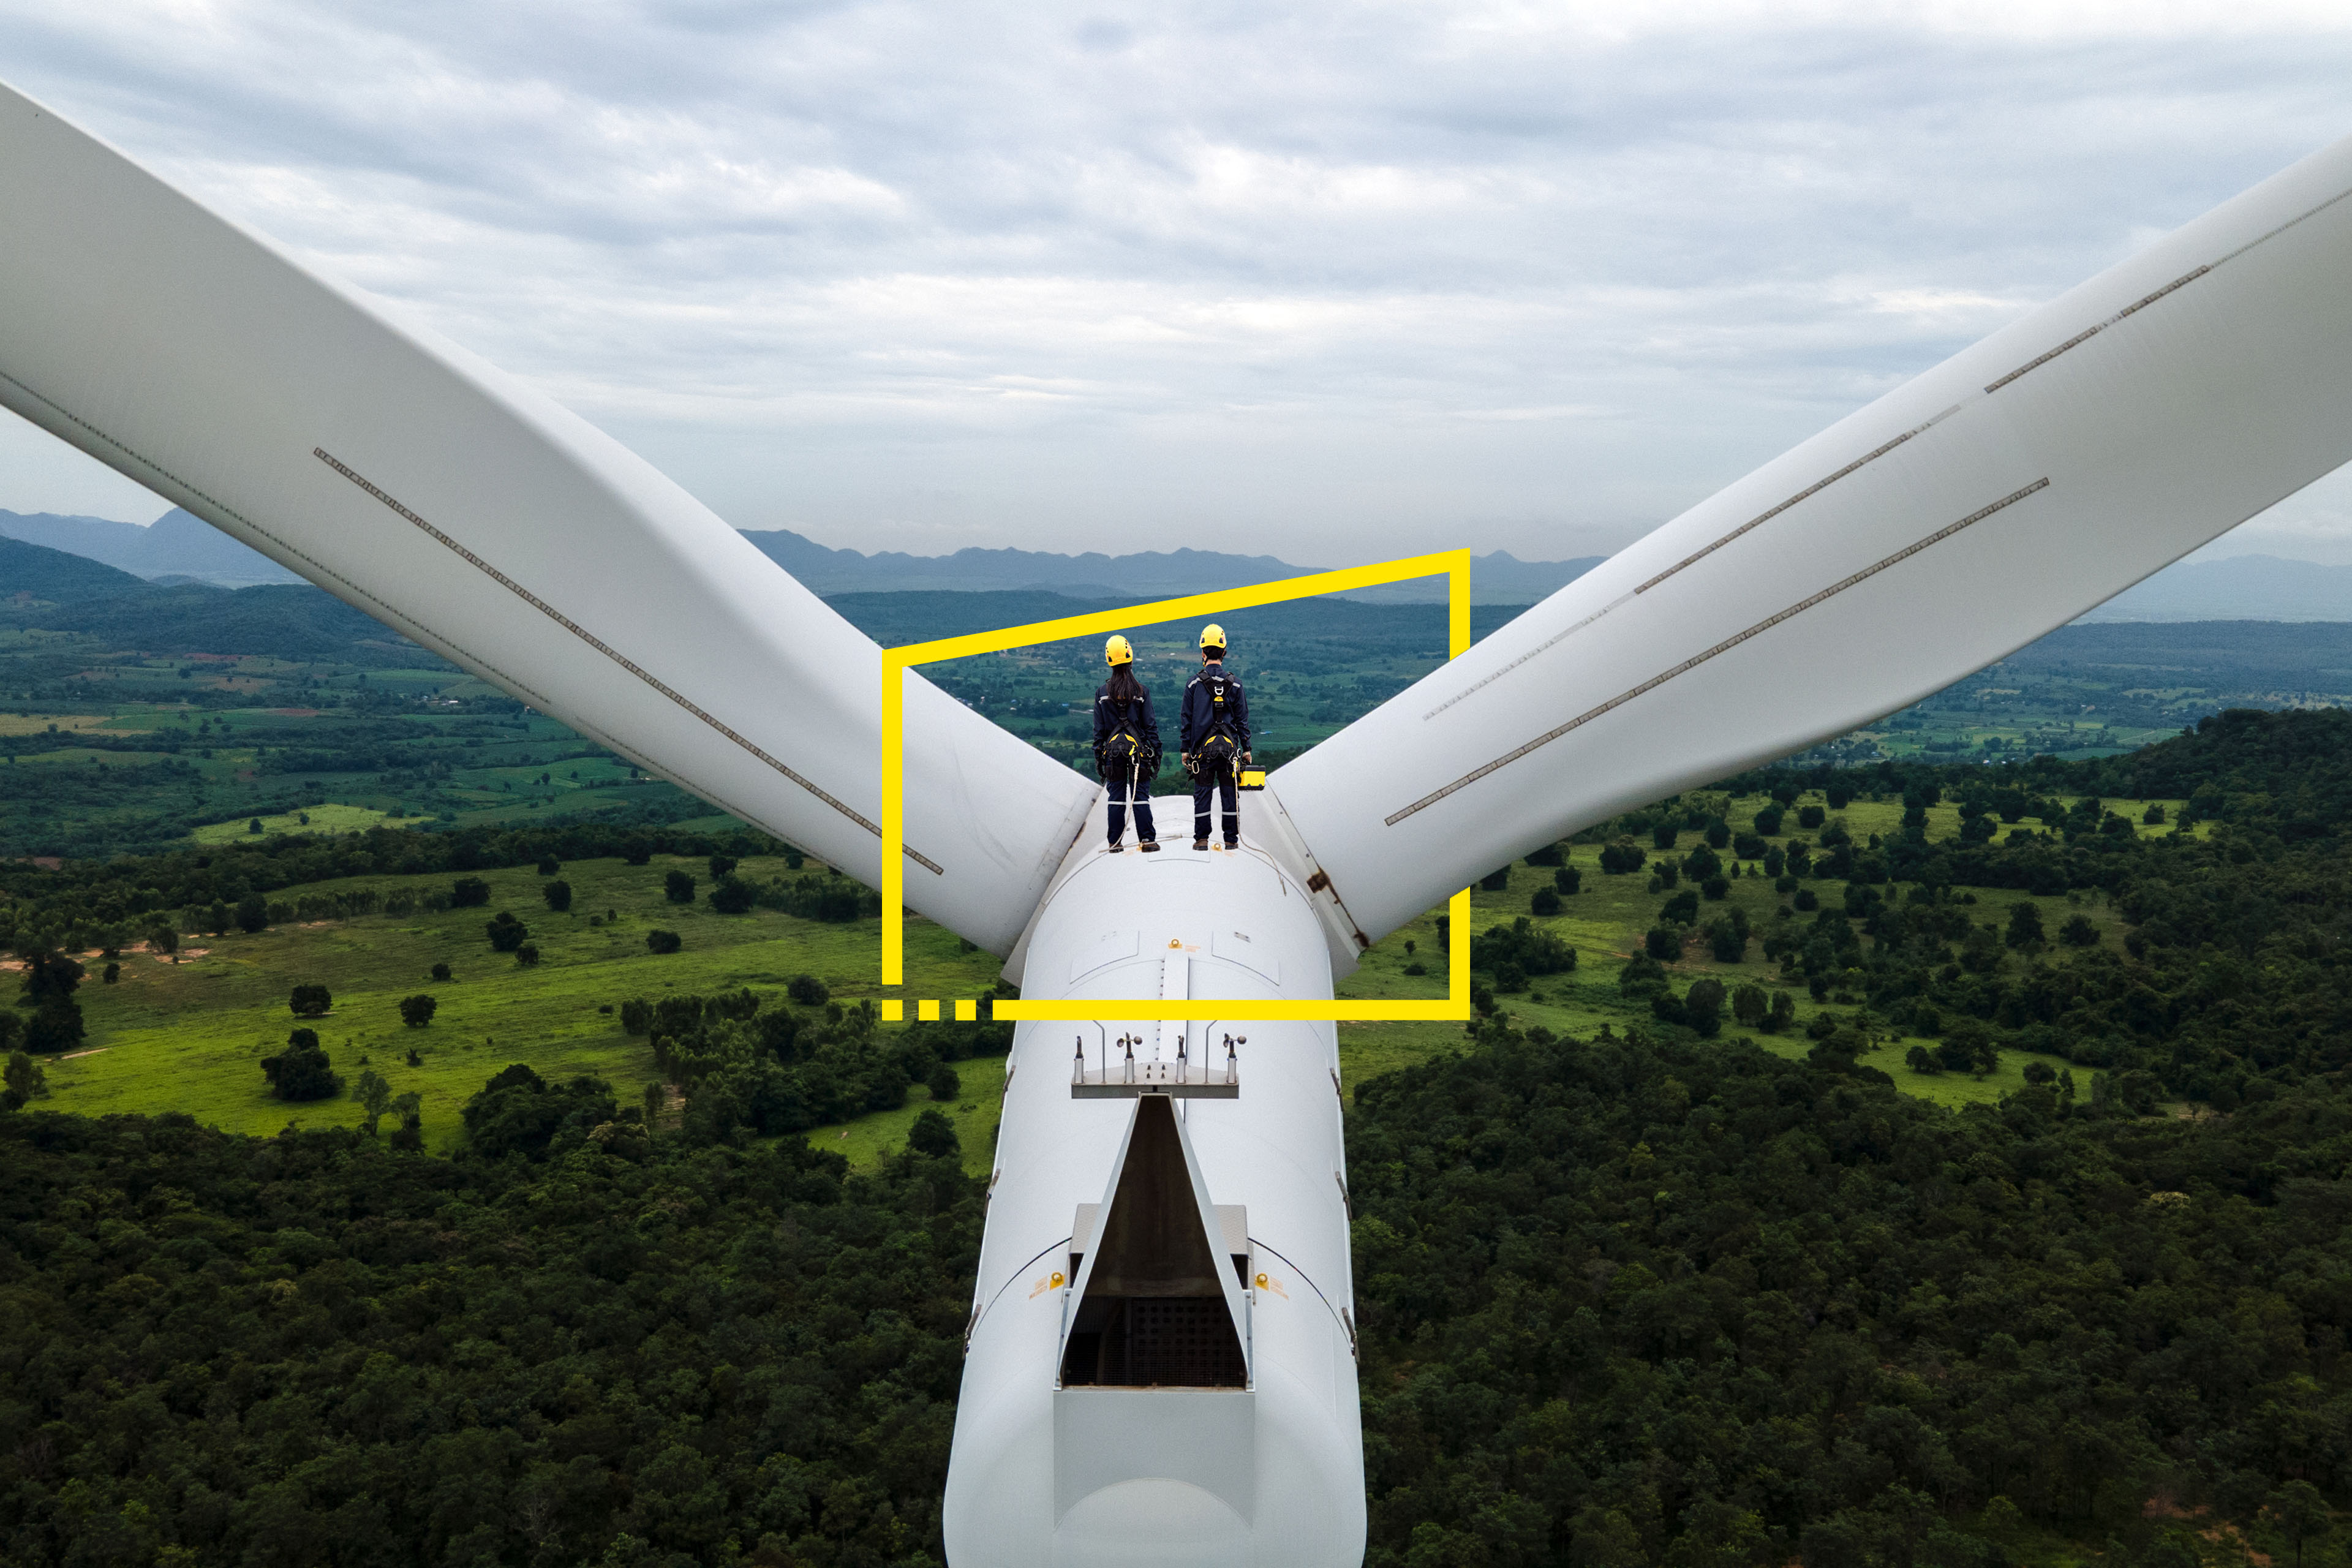 Two engineers working on top of wind turbine background